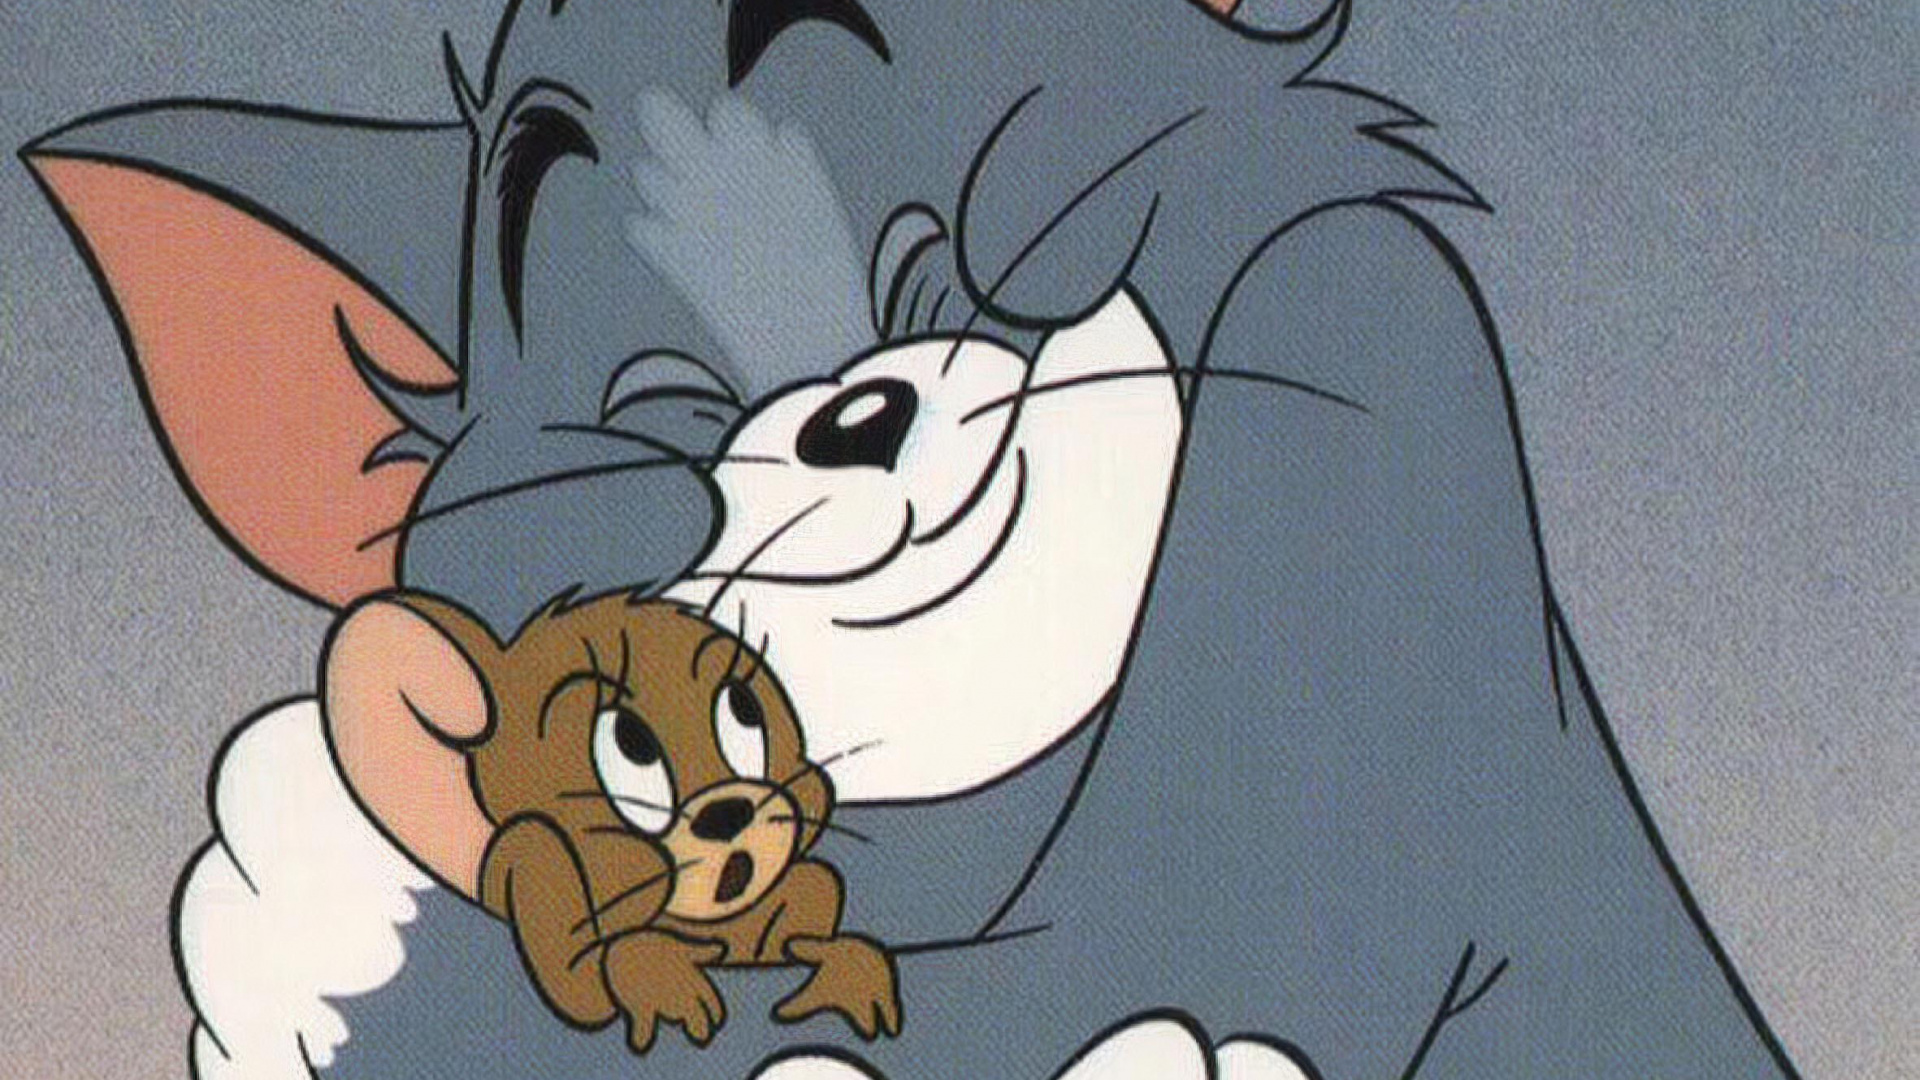 Tom and Jerry Aesthetic, Tom Cat, Jerry Mouse, Aesthetics, Cartoon. Wallpaper in 1920x1080 Resolution